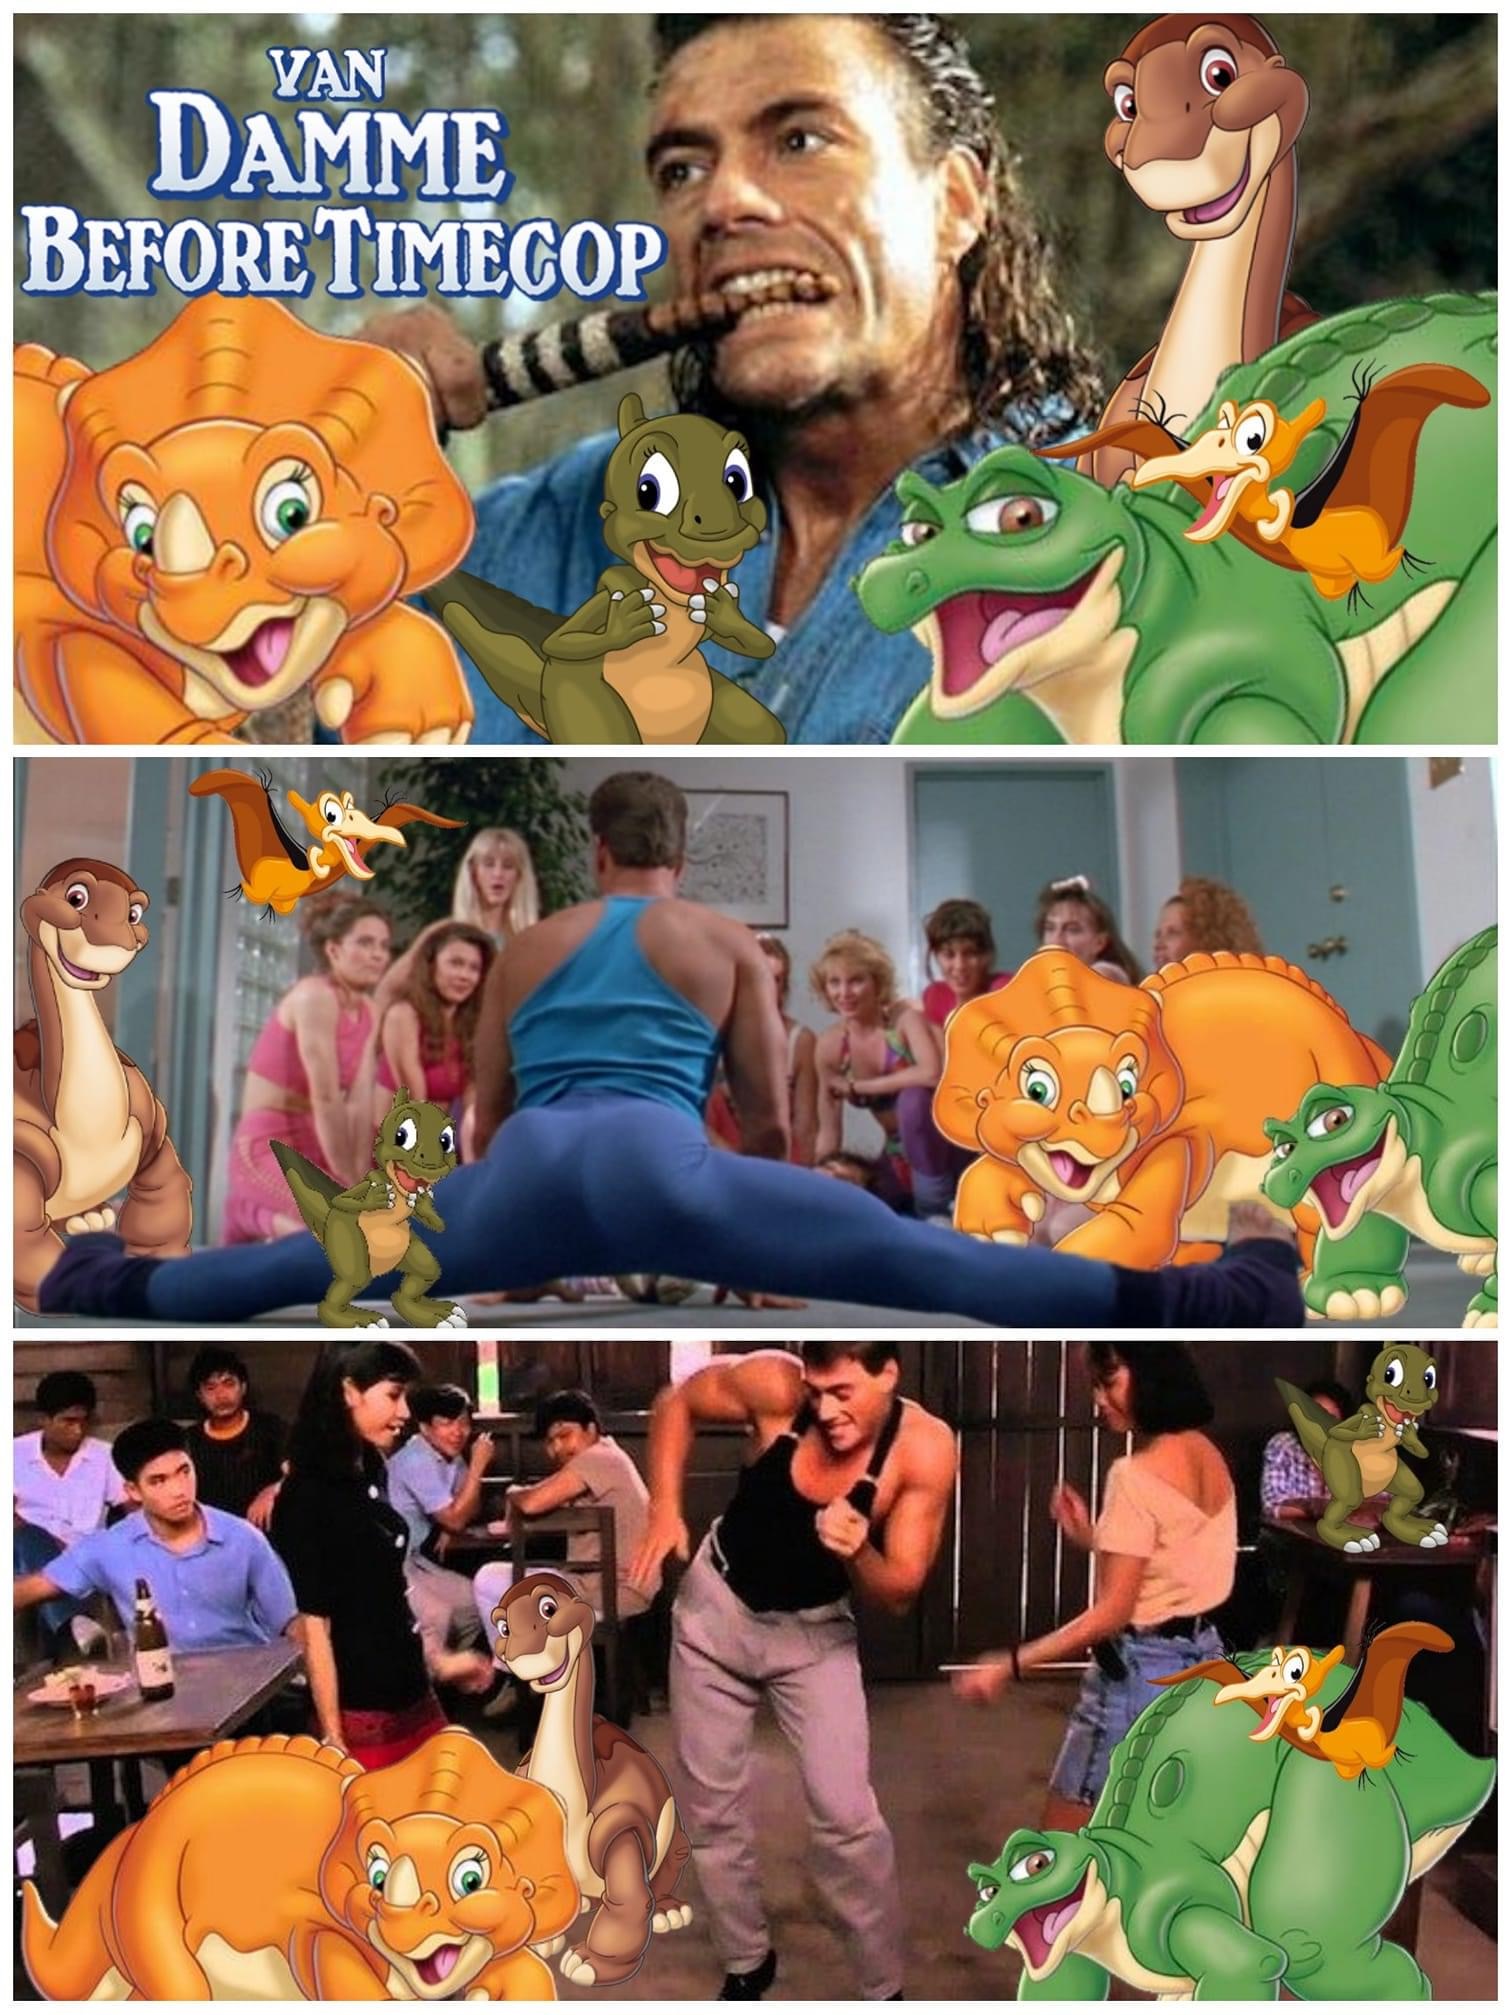 land before time - Van Damme Before Timecop